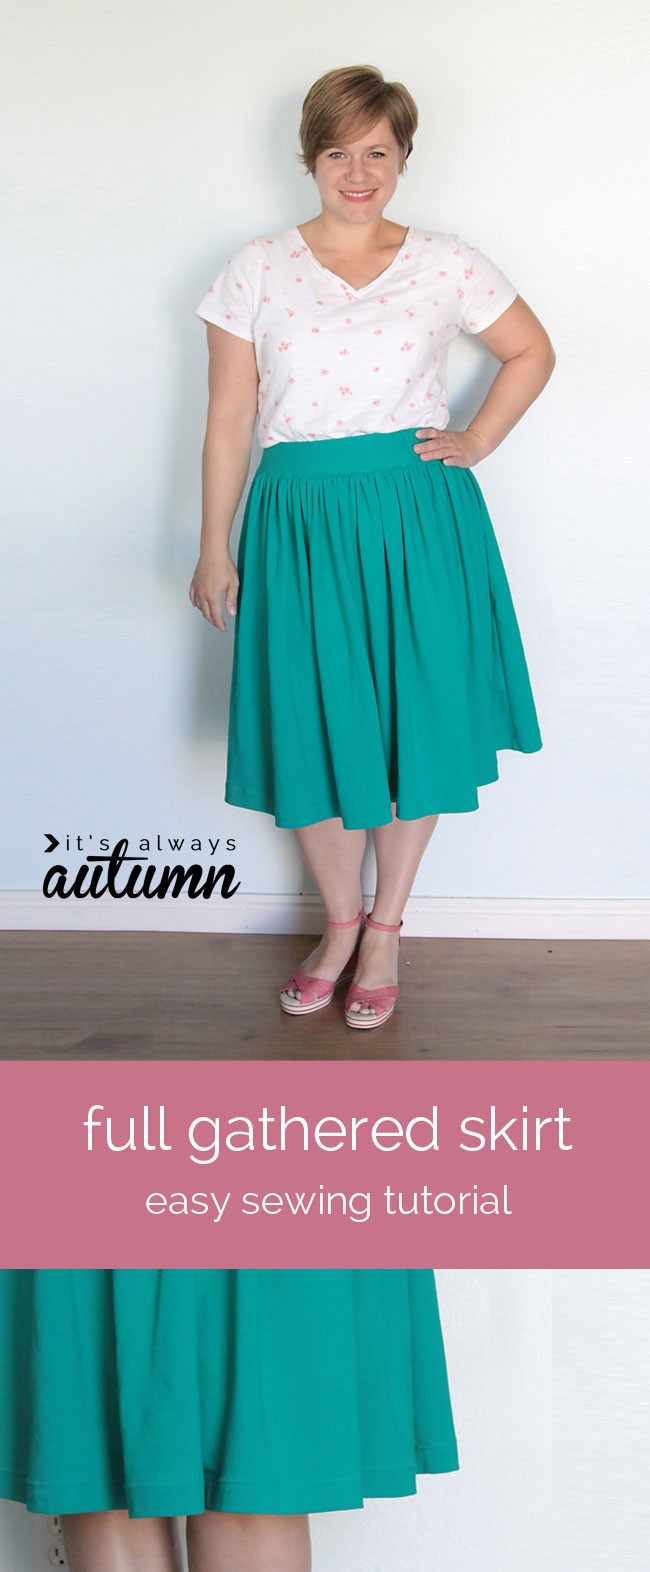 FREE PATTERN ALERT: 15+ Pants and Skirts Sewing Tutorials | On the ...